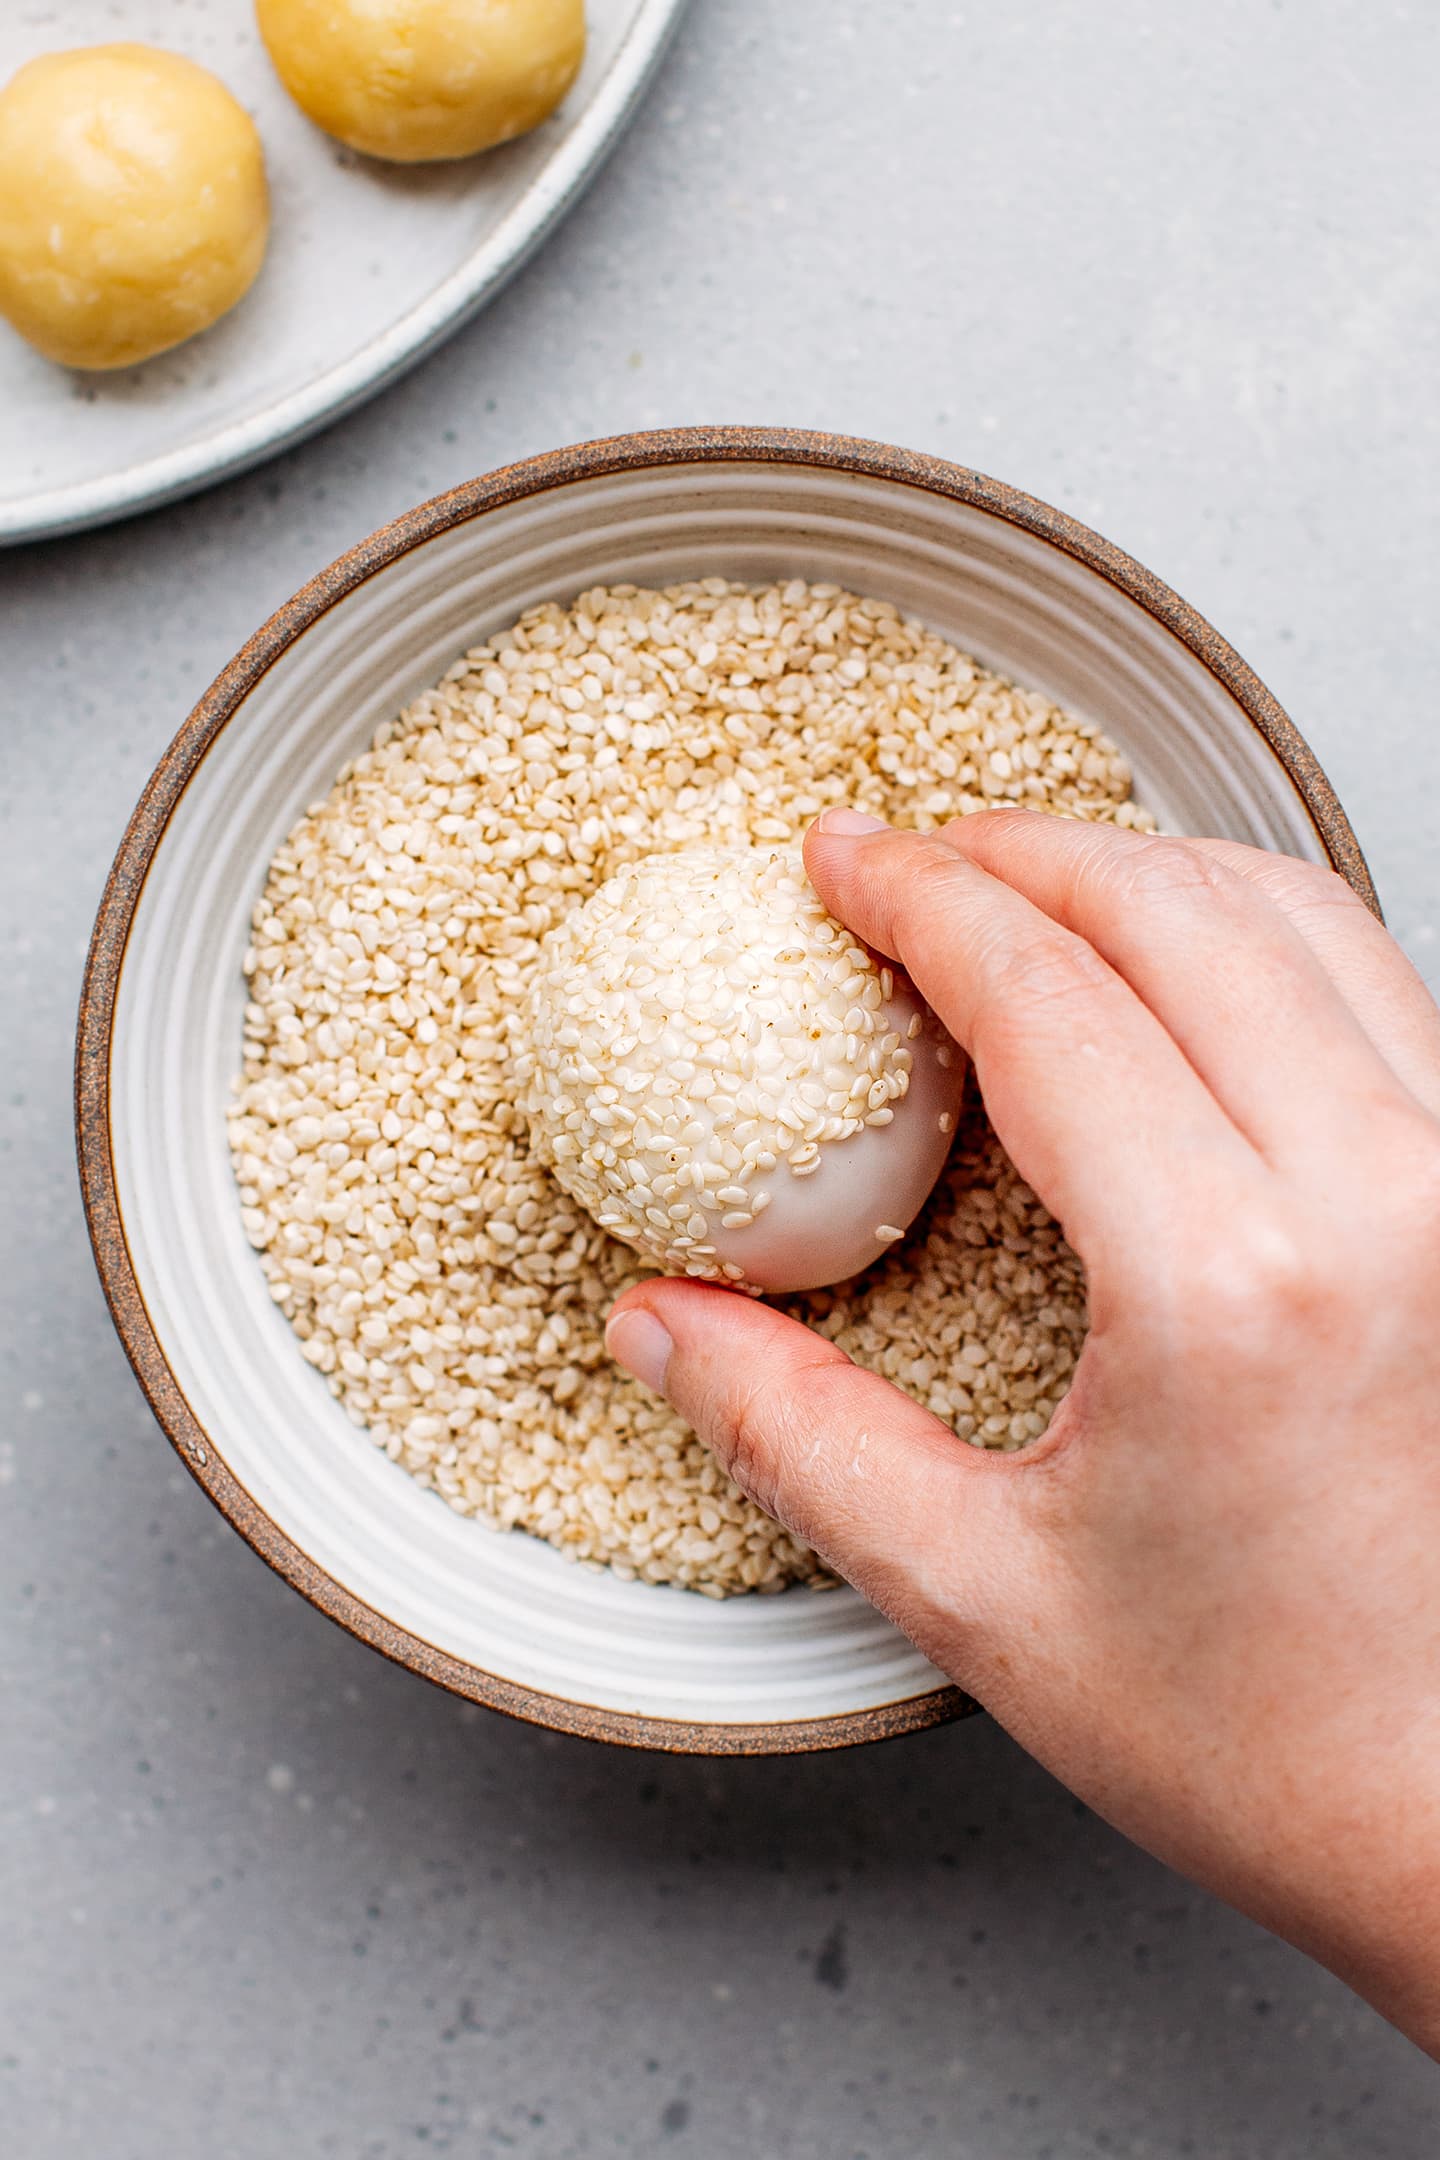 Dipping sweet rice ball into sesame seeds.